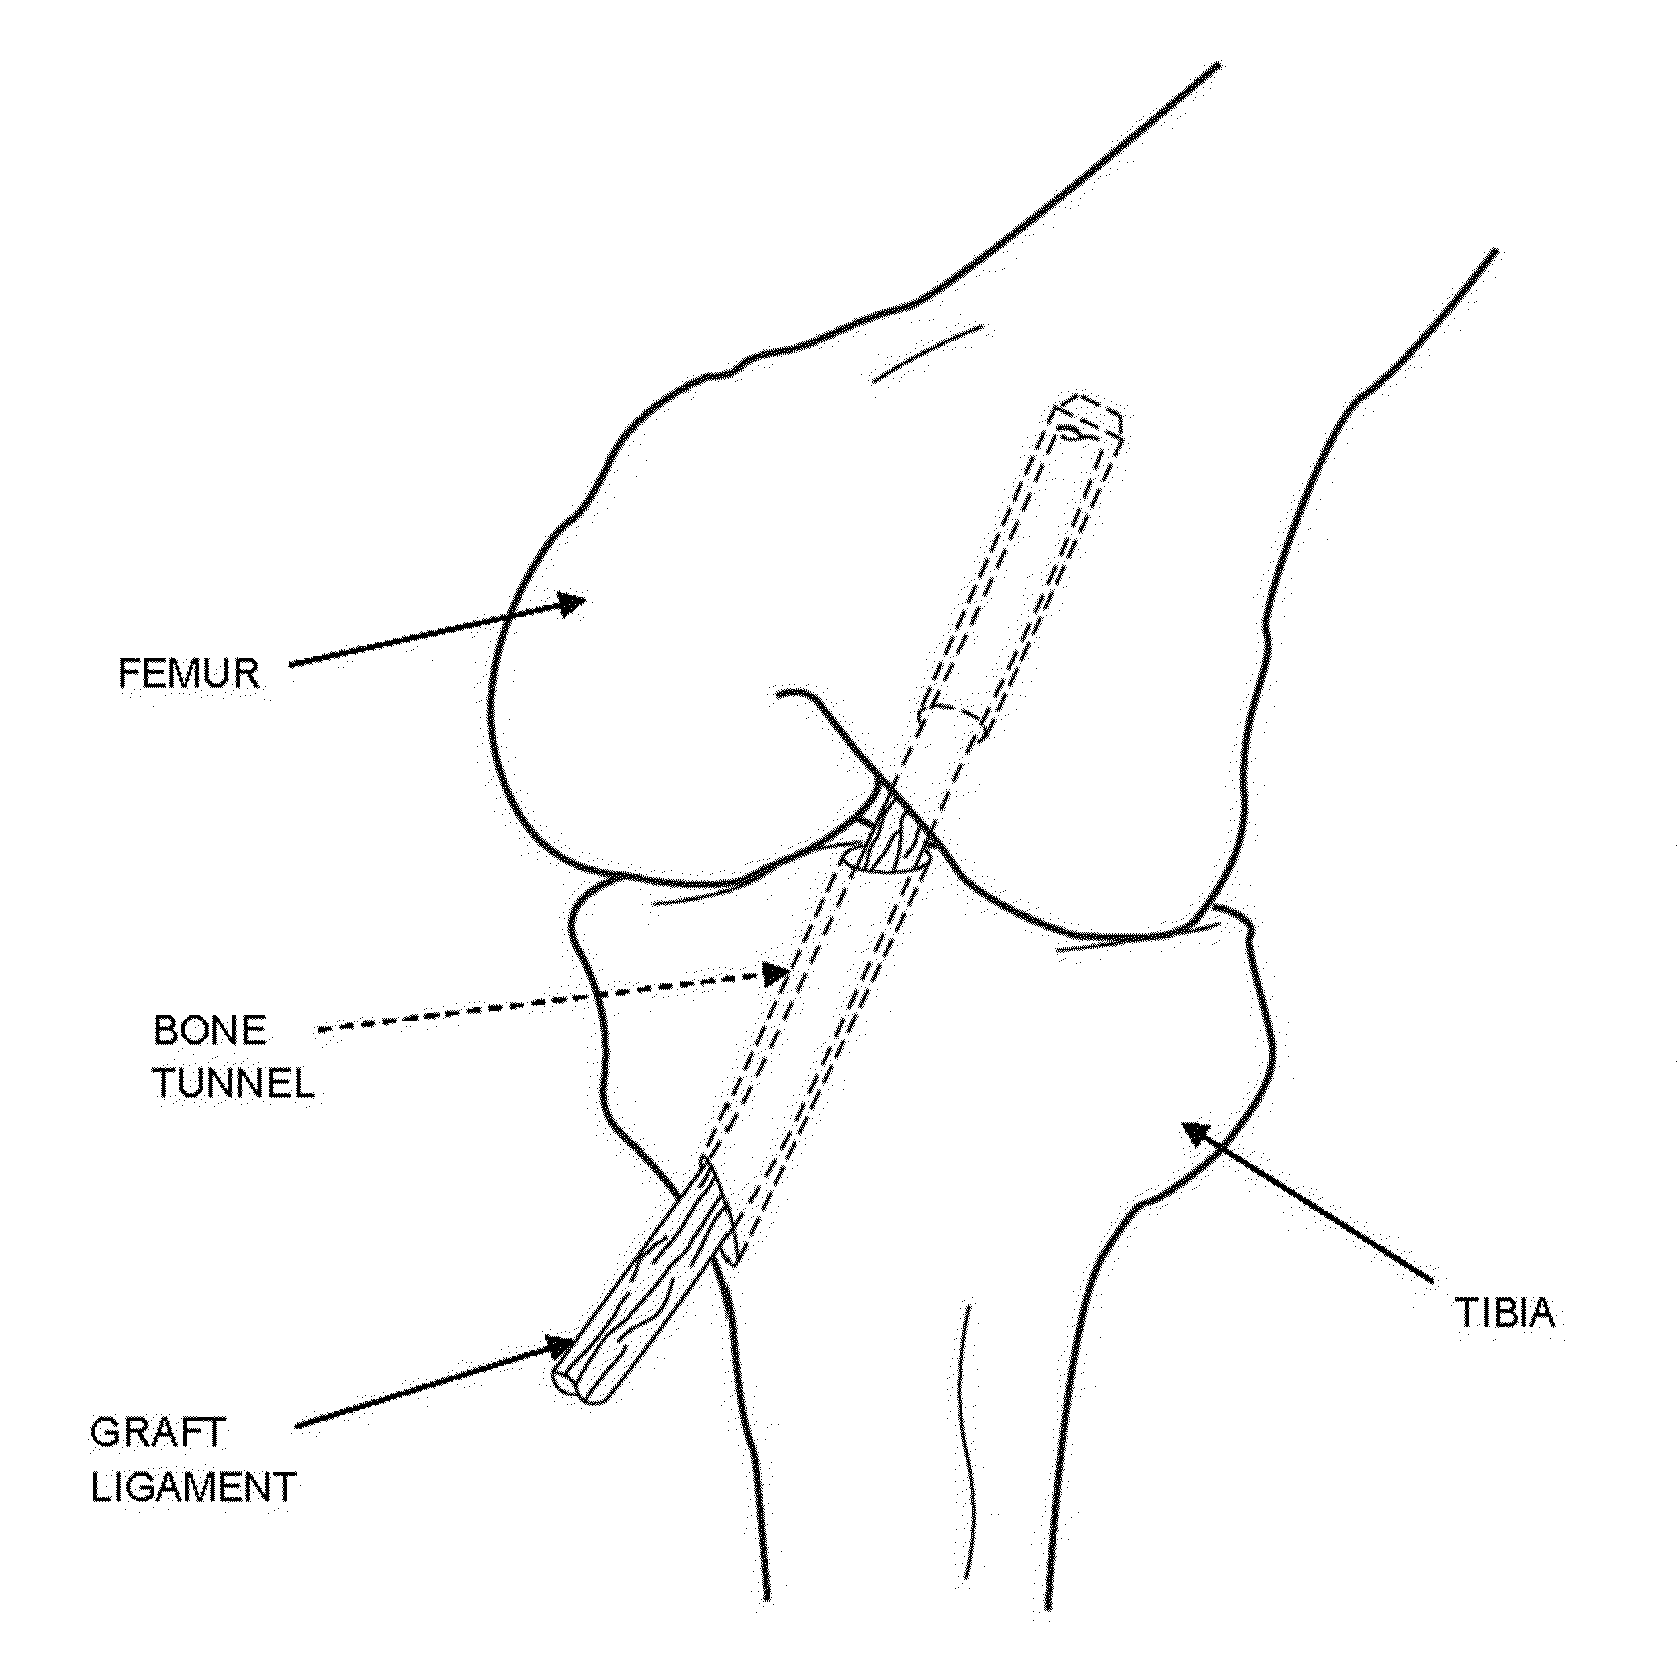 Method and apparatus for reconstructing a ligament